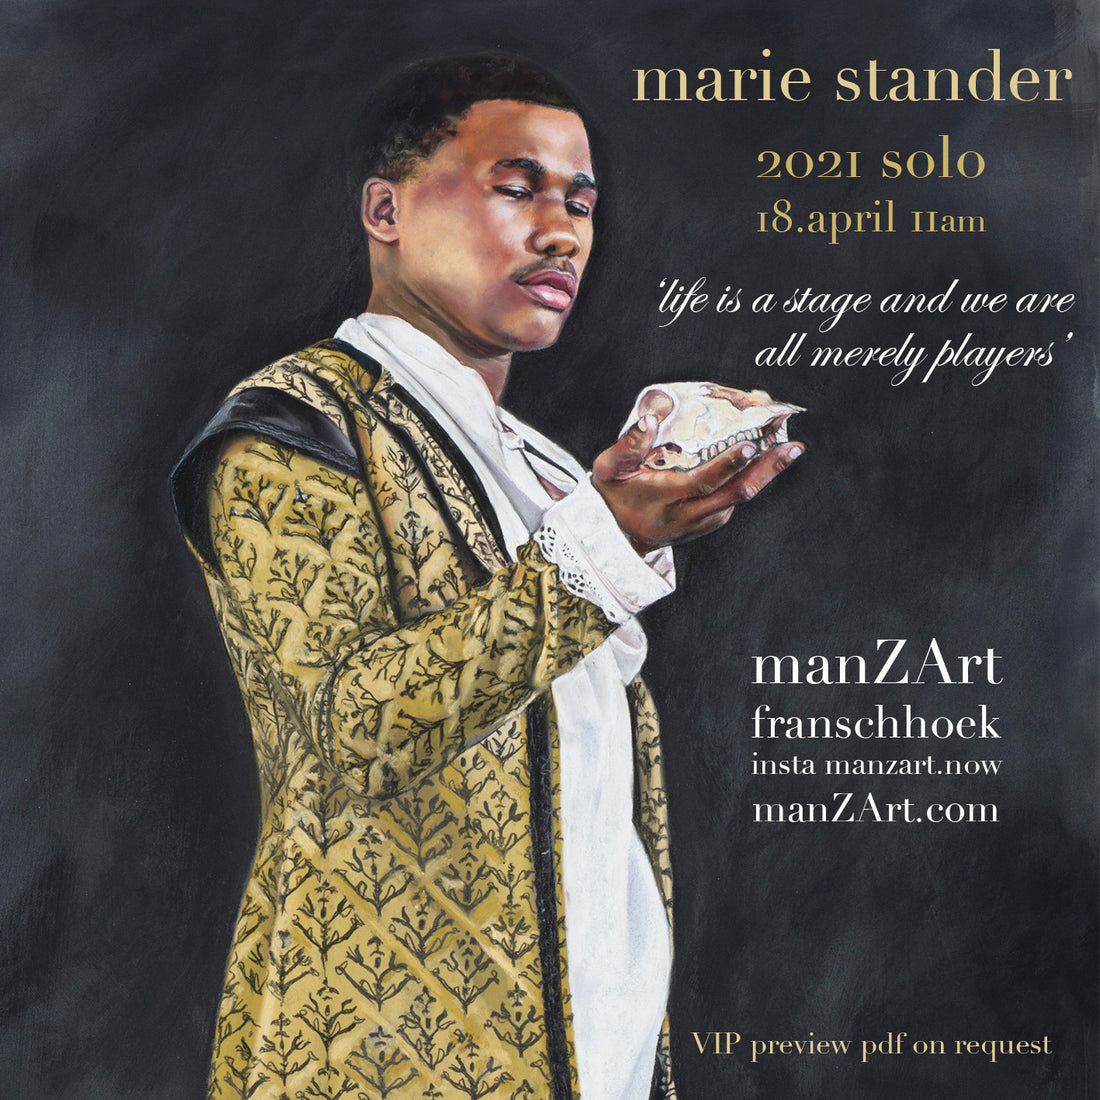 marie stander - 2021 solo show - 18.april at manZArt gallery